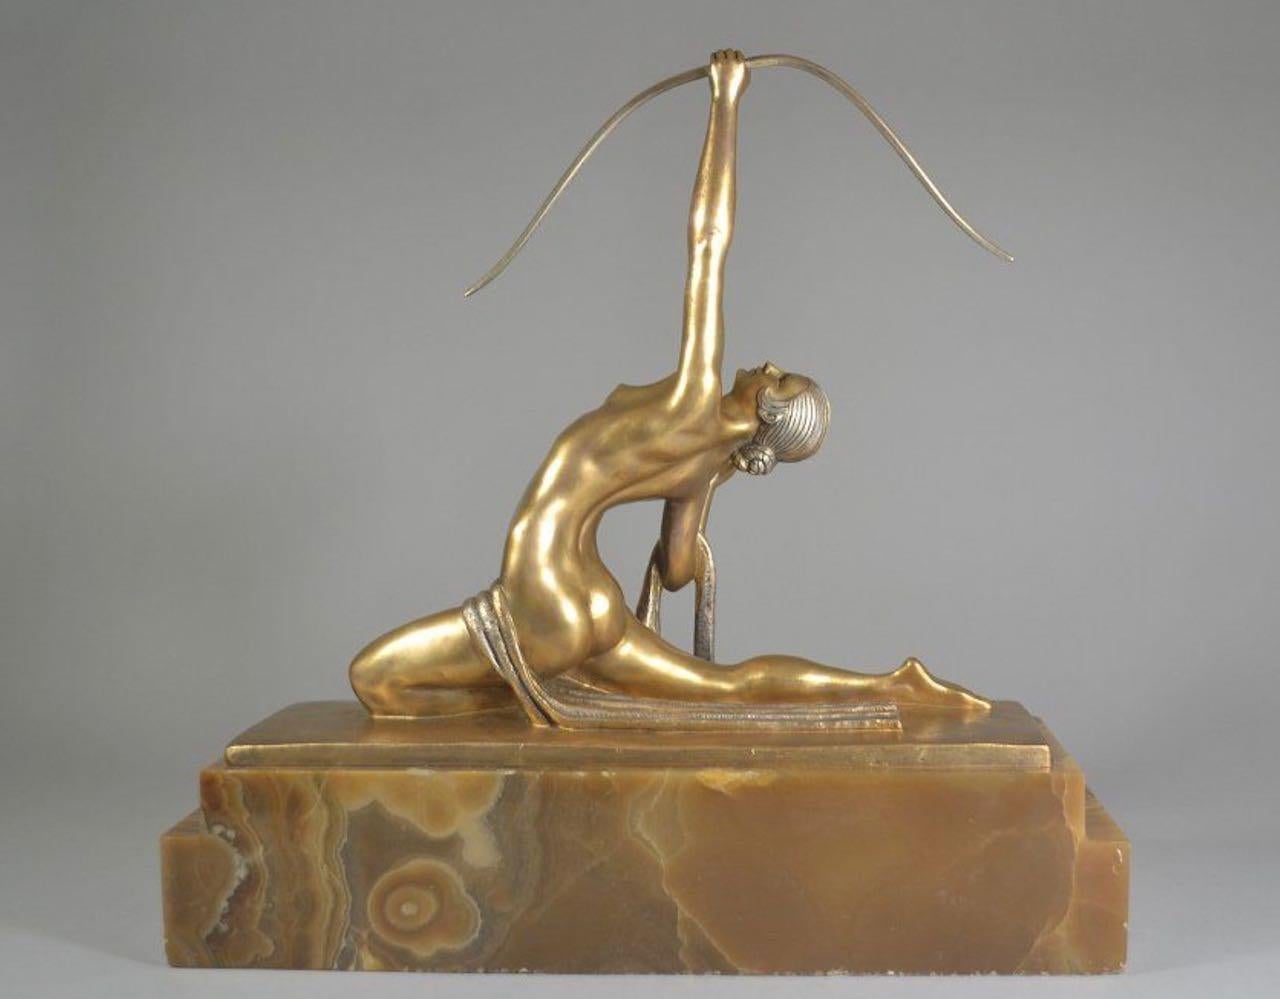 This stunning bronze sculpture portrays Diana the Huntress, the Roman goddess of the hunt, on a large onyx marble base. The sculpture was crafted by the renowned French artist Marcel Bouraine in the 1930s, making it a rare and valuable piece of